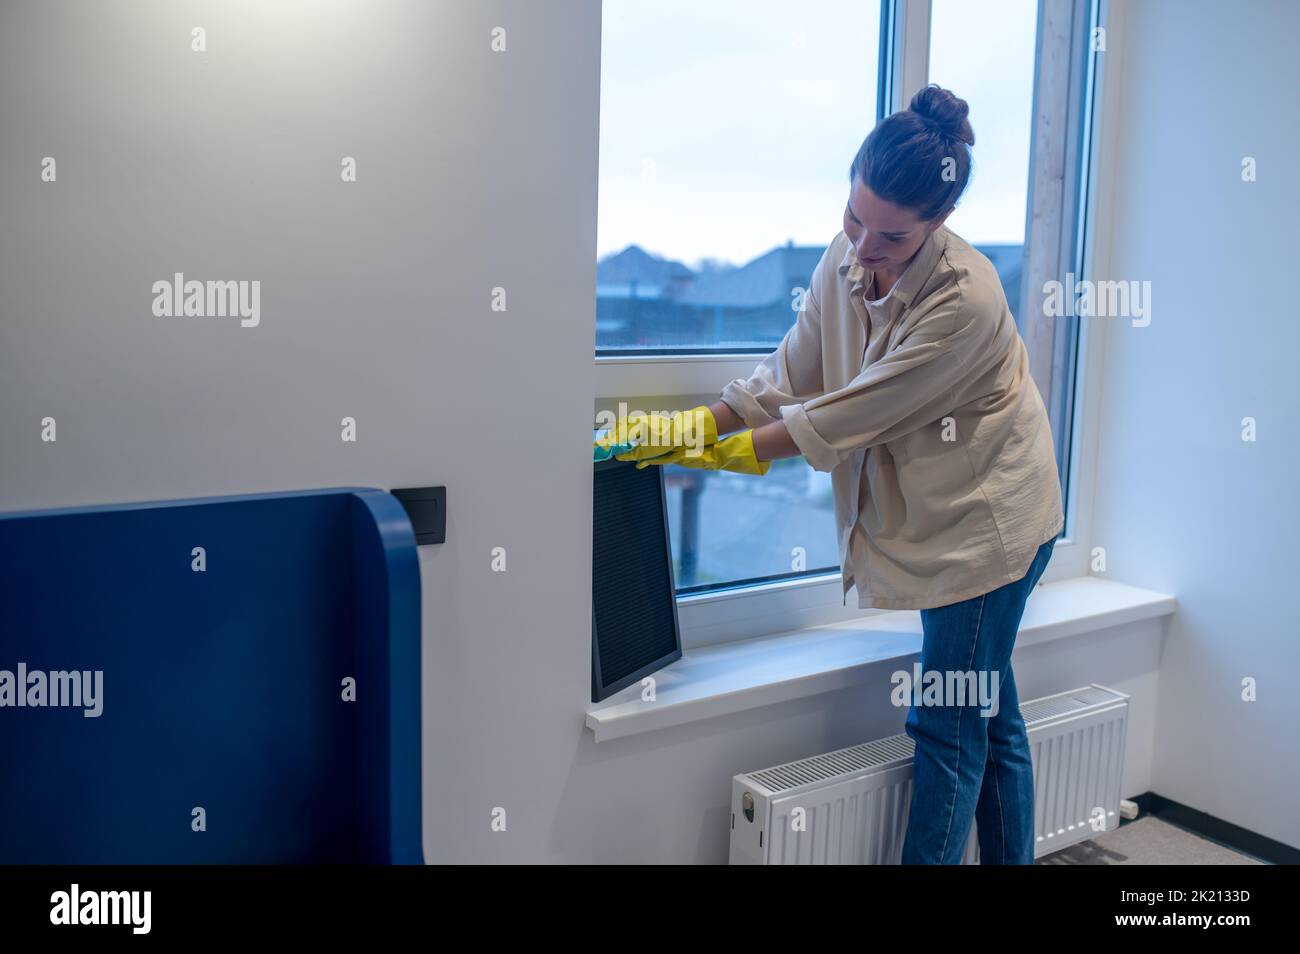 Focused cleaning lady busy dusting the room Stock Photo